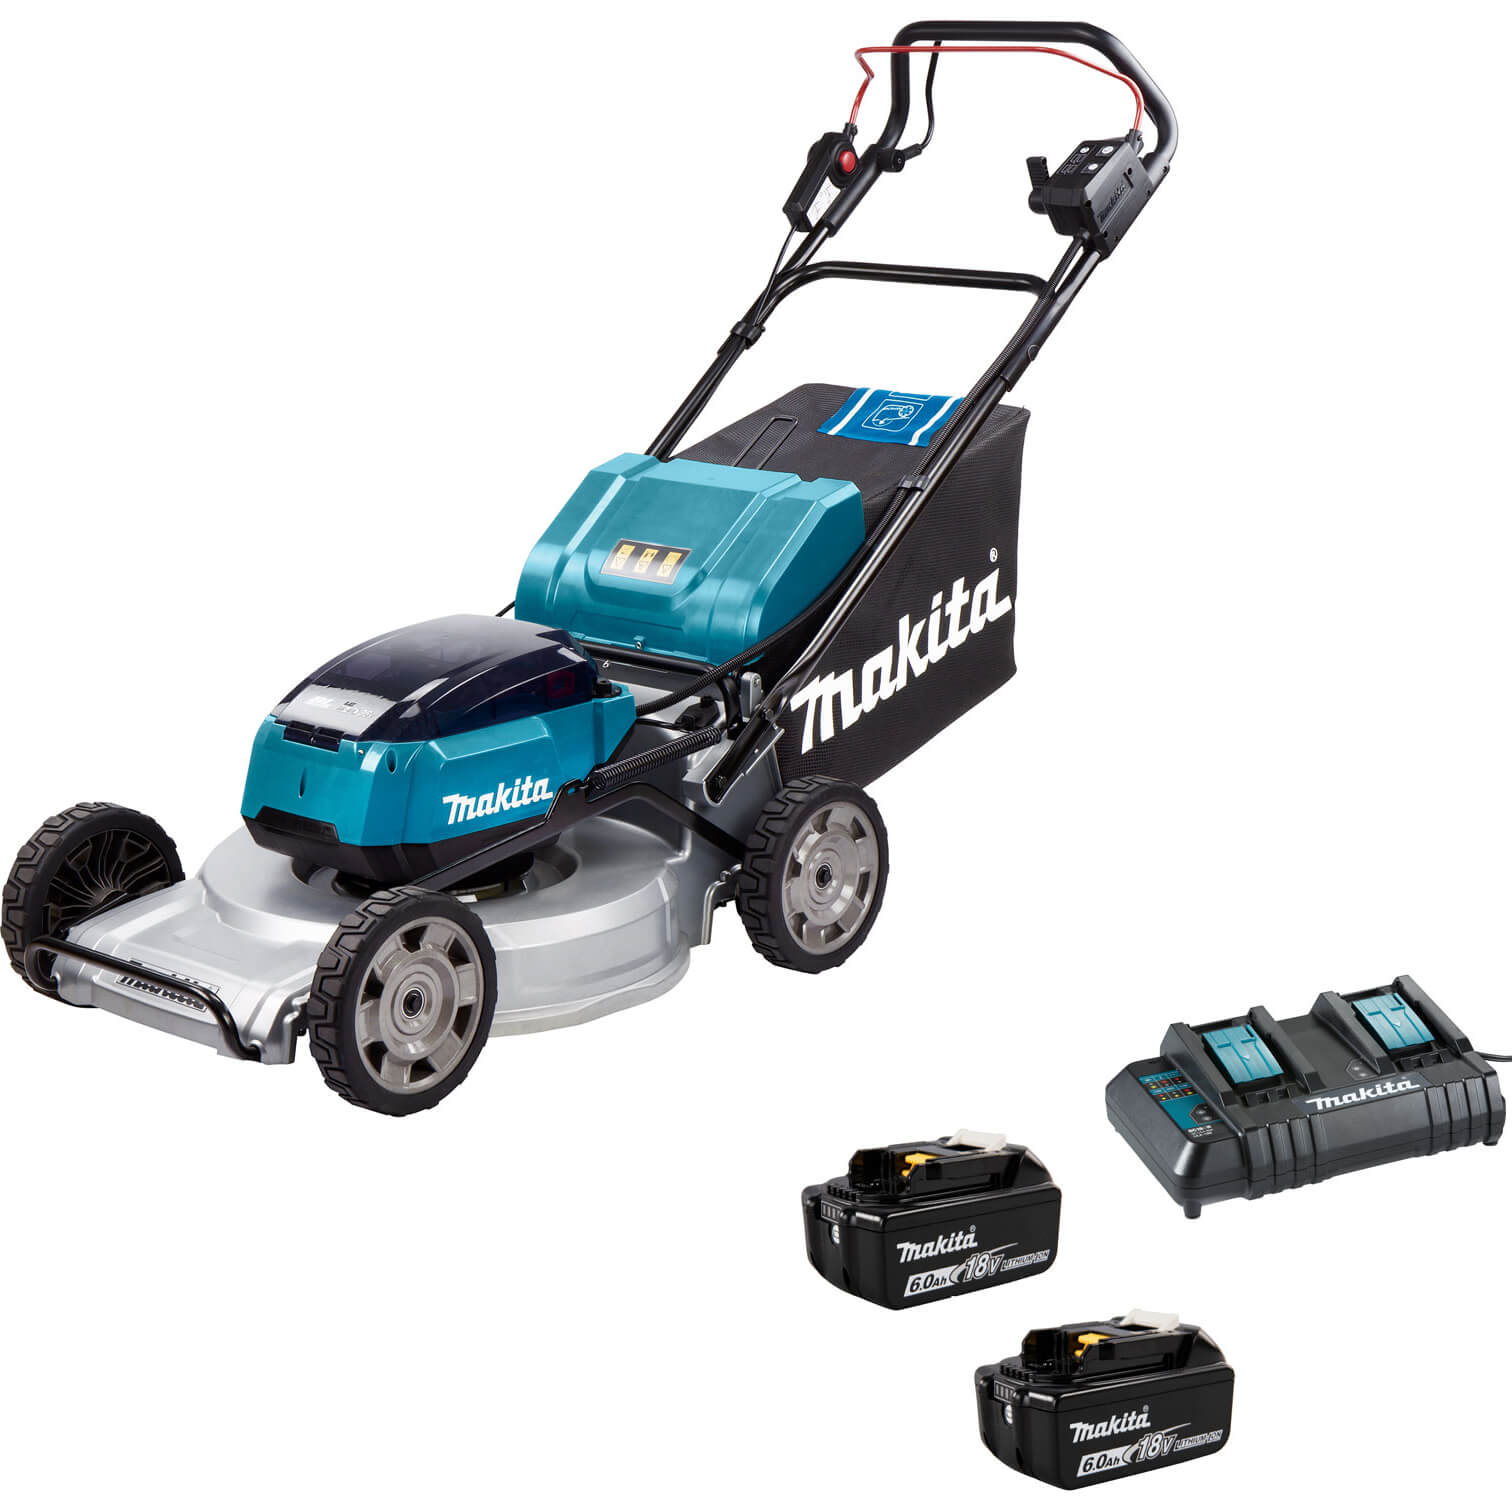 Image of Makita DLM533 Twin 18v LXT Cordless Brushless Lawnmower 530mm 2 x 6ah Li-ion Charger